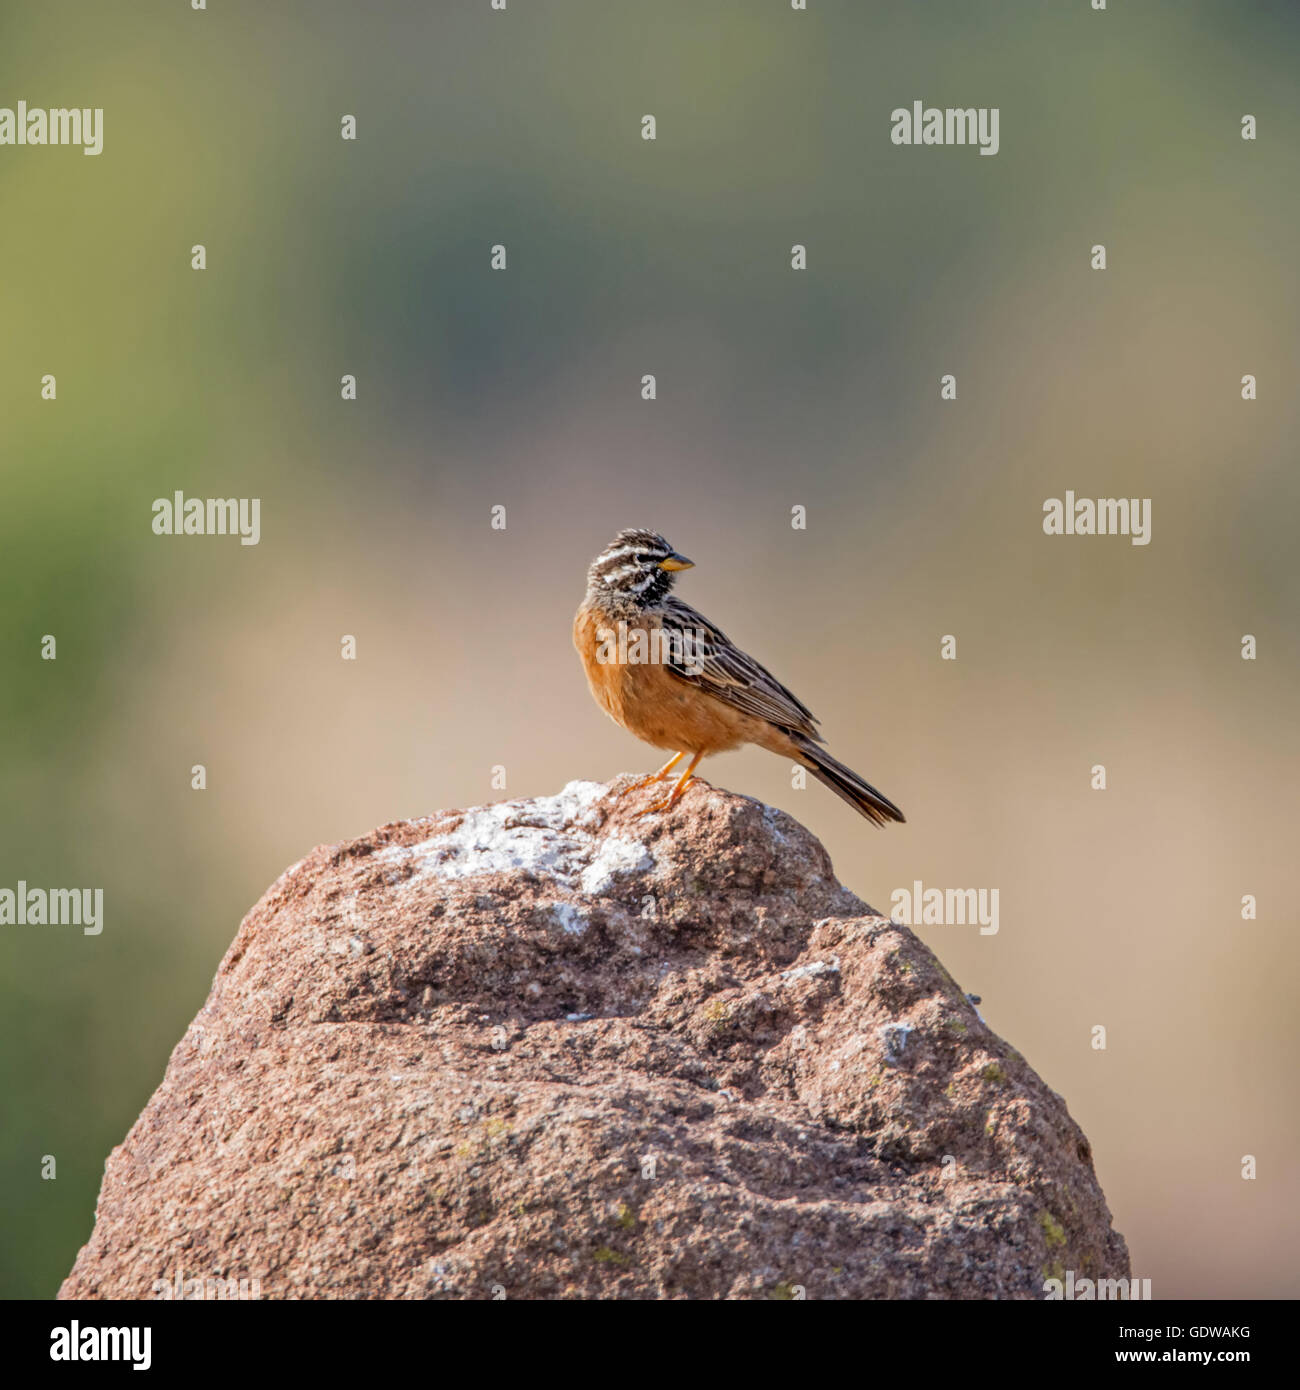 A Cinnamon-breasted Bunting perched on a termite mound in Southern Africa Stock Photo